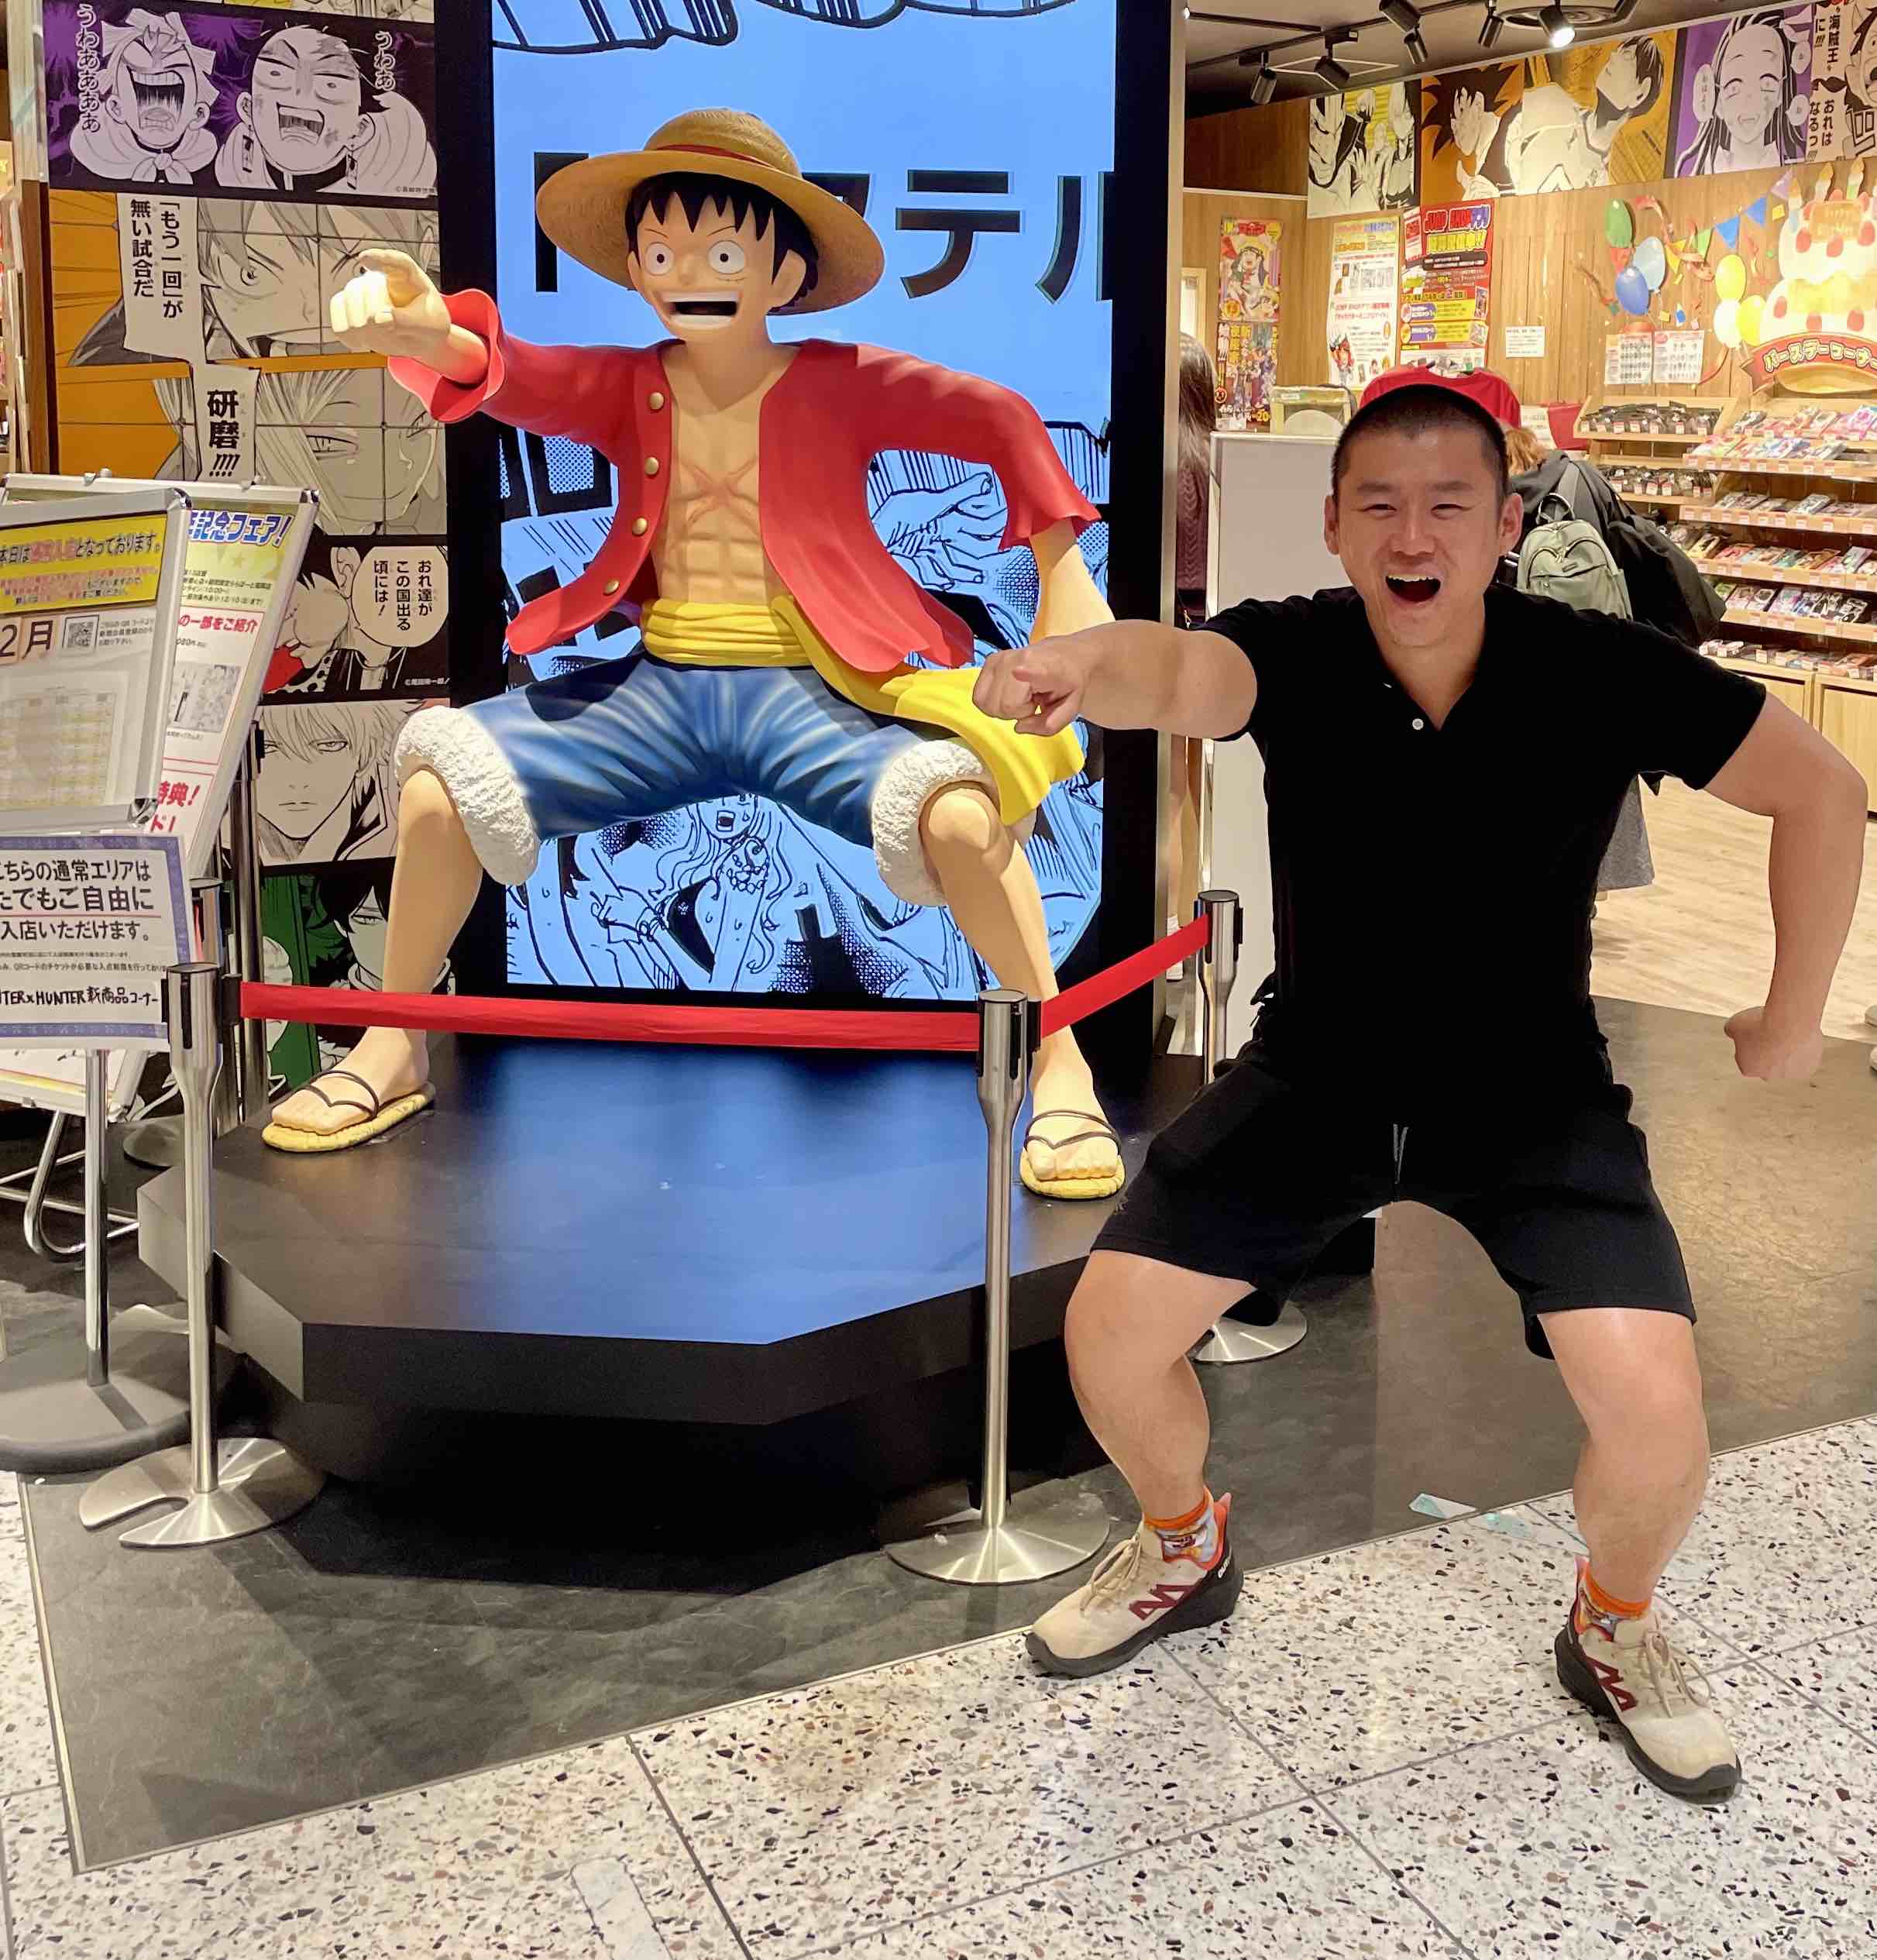 Me and luffy